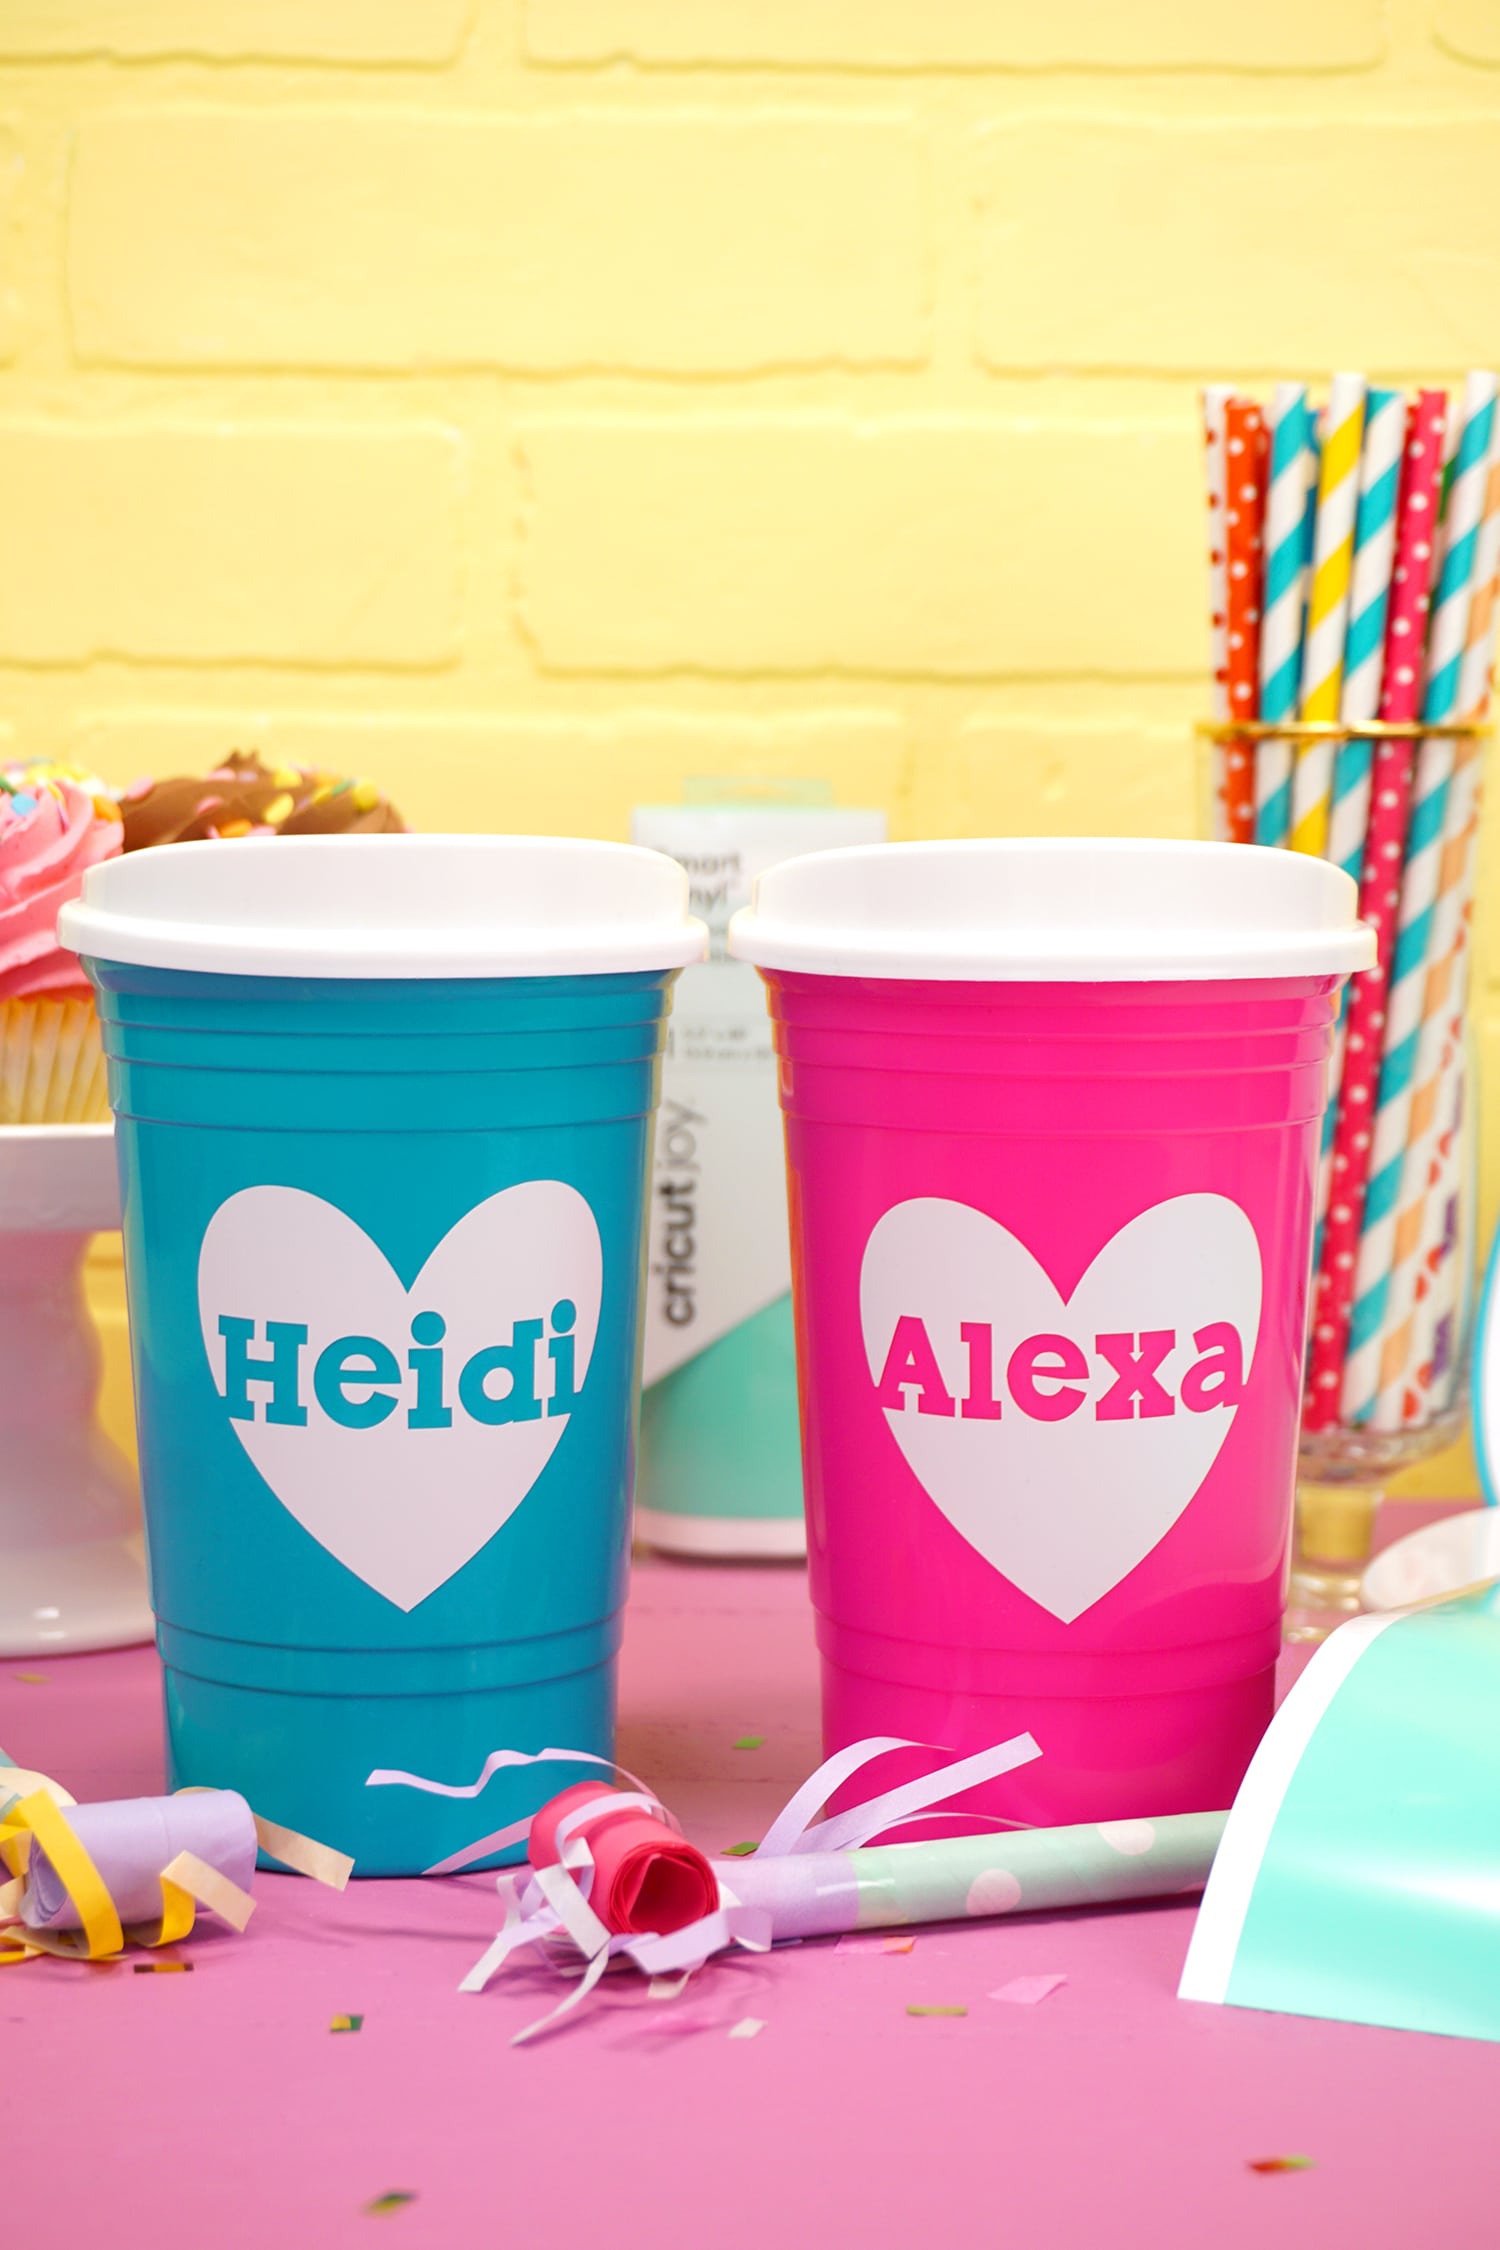 https://www.happinessishomemade.net/wp-content/uploads/2020/02/Cricut-Joy-Personalized-Party-Cups.jpg